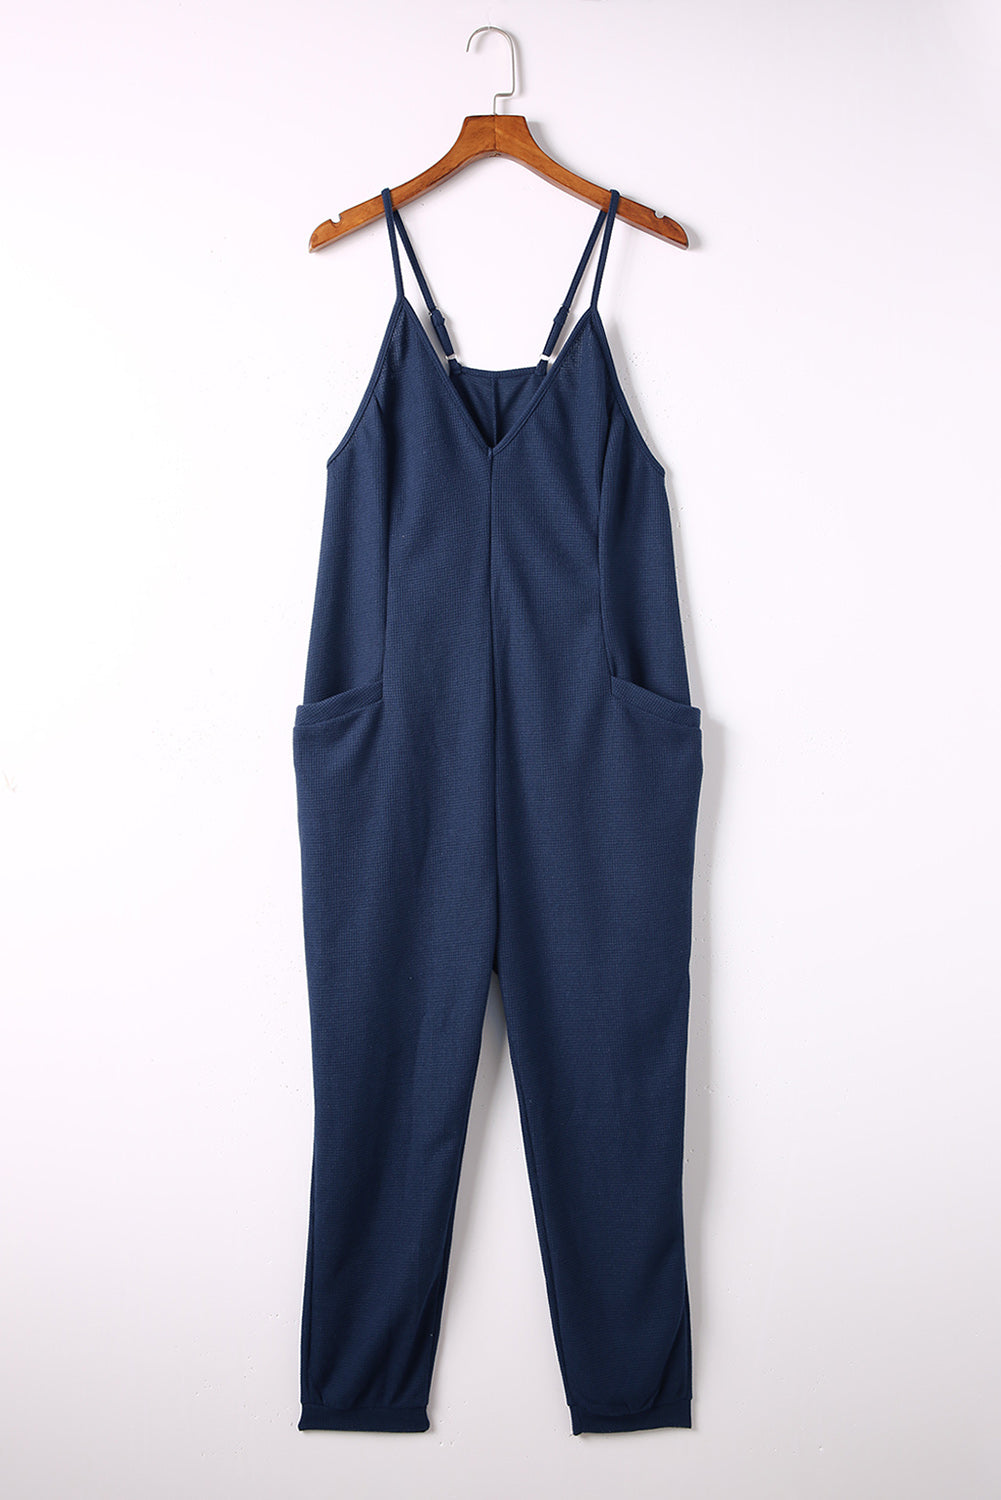 Spaghetti Strap Deep V Jumpsuit with Pockets The Stout Steer